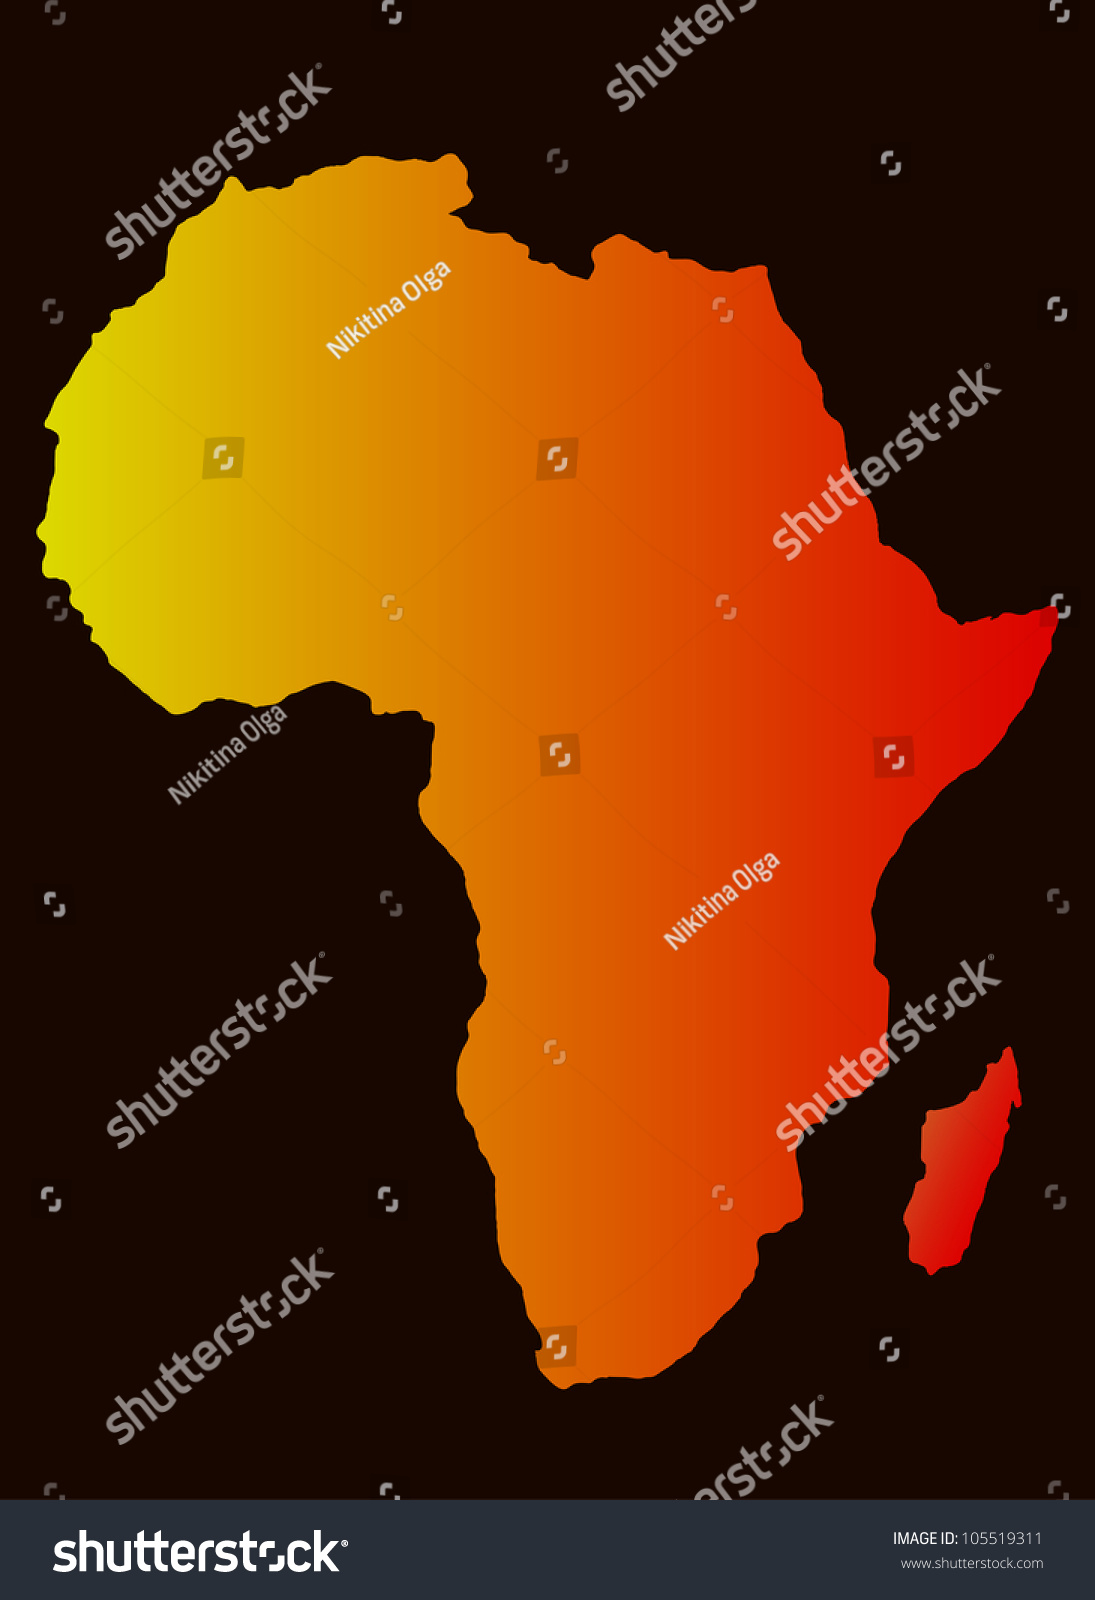 Background Africa Map Silhouette Vector Image Stock Vector Royalty Free 105519311 Shutterstock 7202